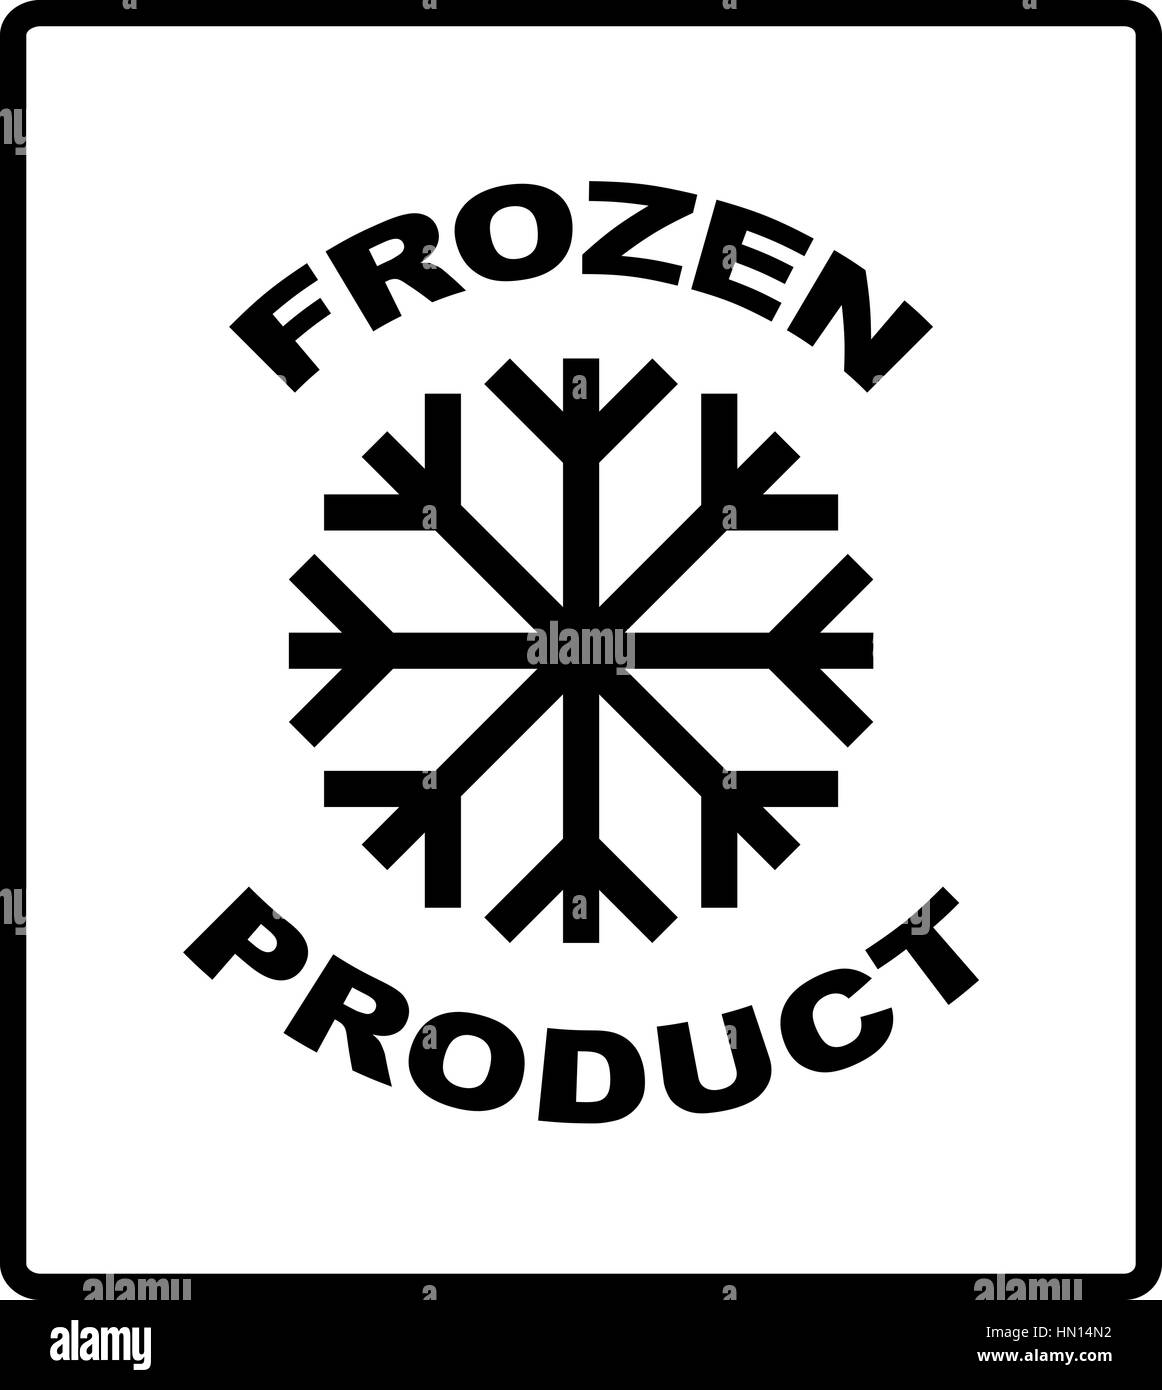 Keep frozen. Storage in Refrigerator and Freezer packaging symbol on a corrugated cardboard box. For use on cardboard boxes, packages and parcels. Vec Stock Vector